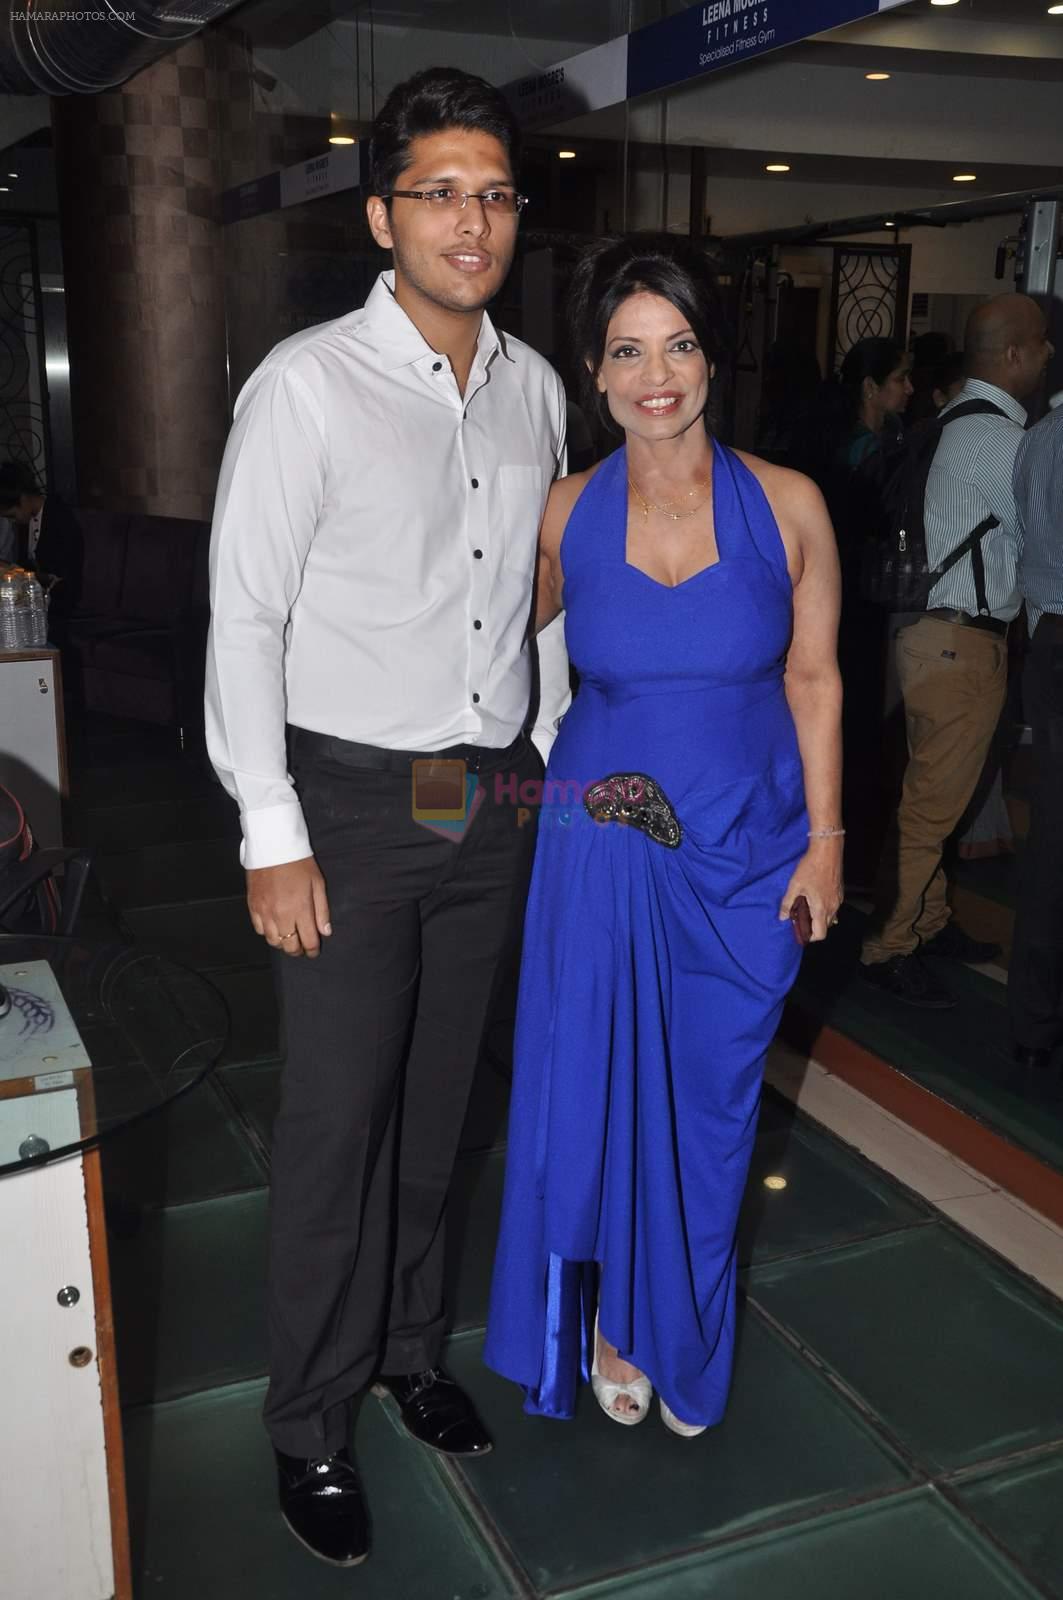 at the launch of Leena Mogre fitness book in Bandra, Mumbai on 30th April 2015